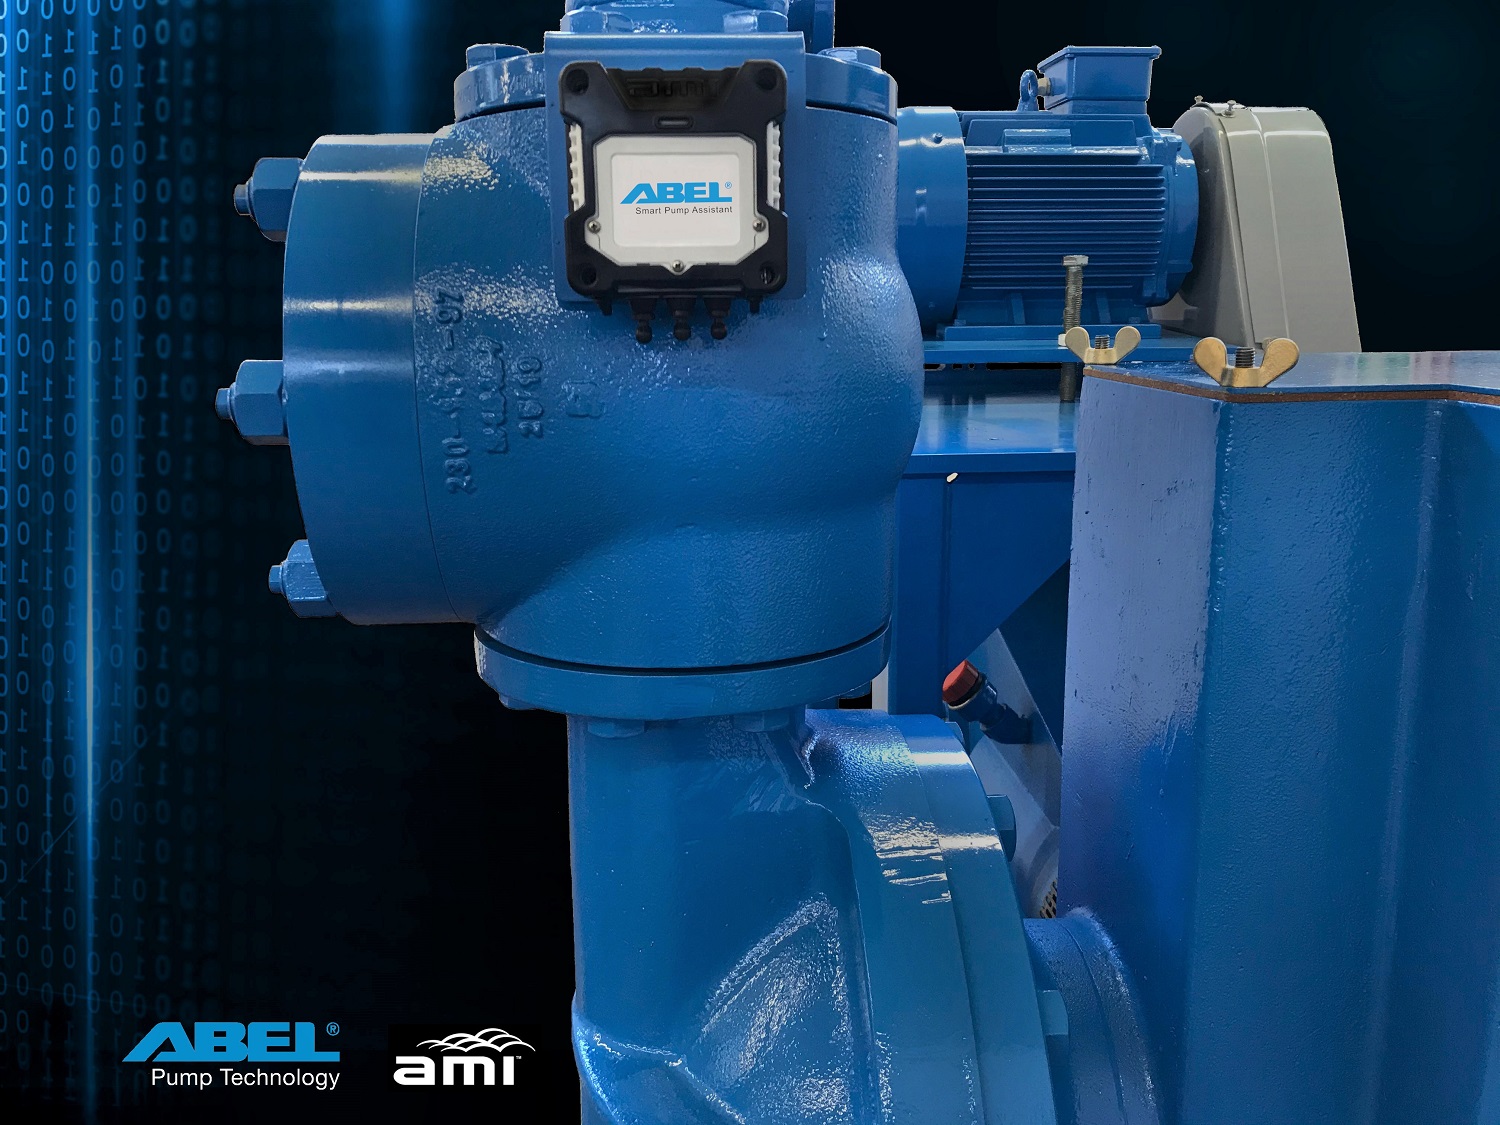 The Smart Pump Assistant by ABEL and AMI Global gives users remote access to pump performance 24 hours a day/